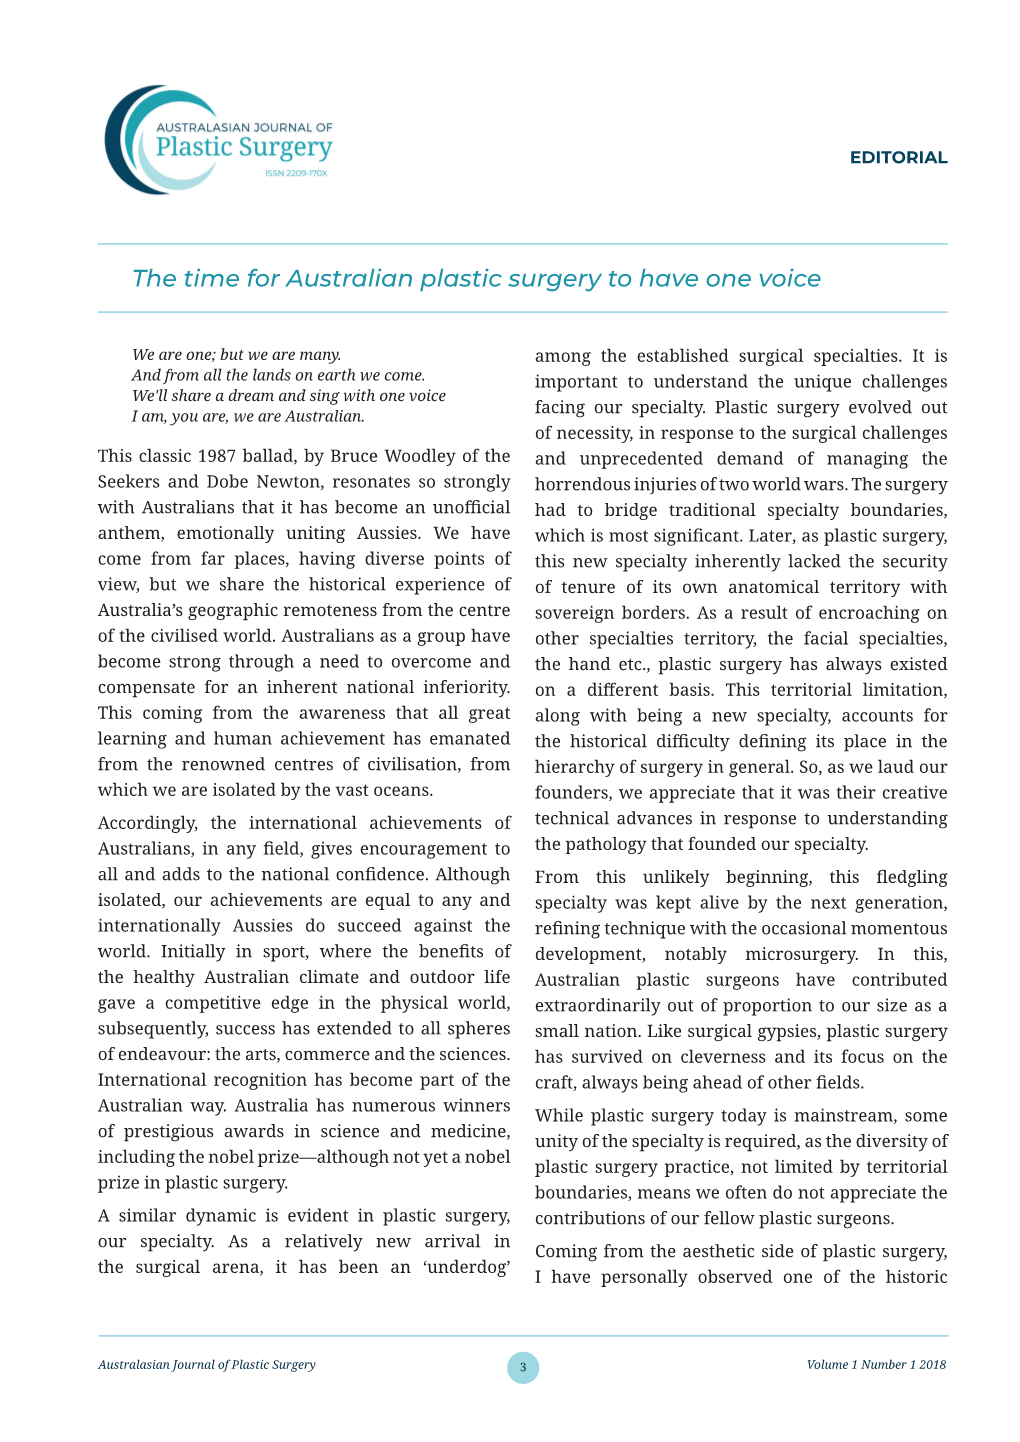 The Time for Australian Plastic Surgery to Have One Voice